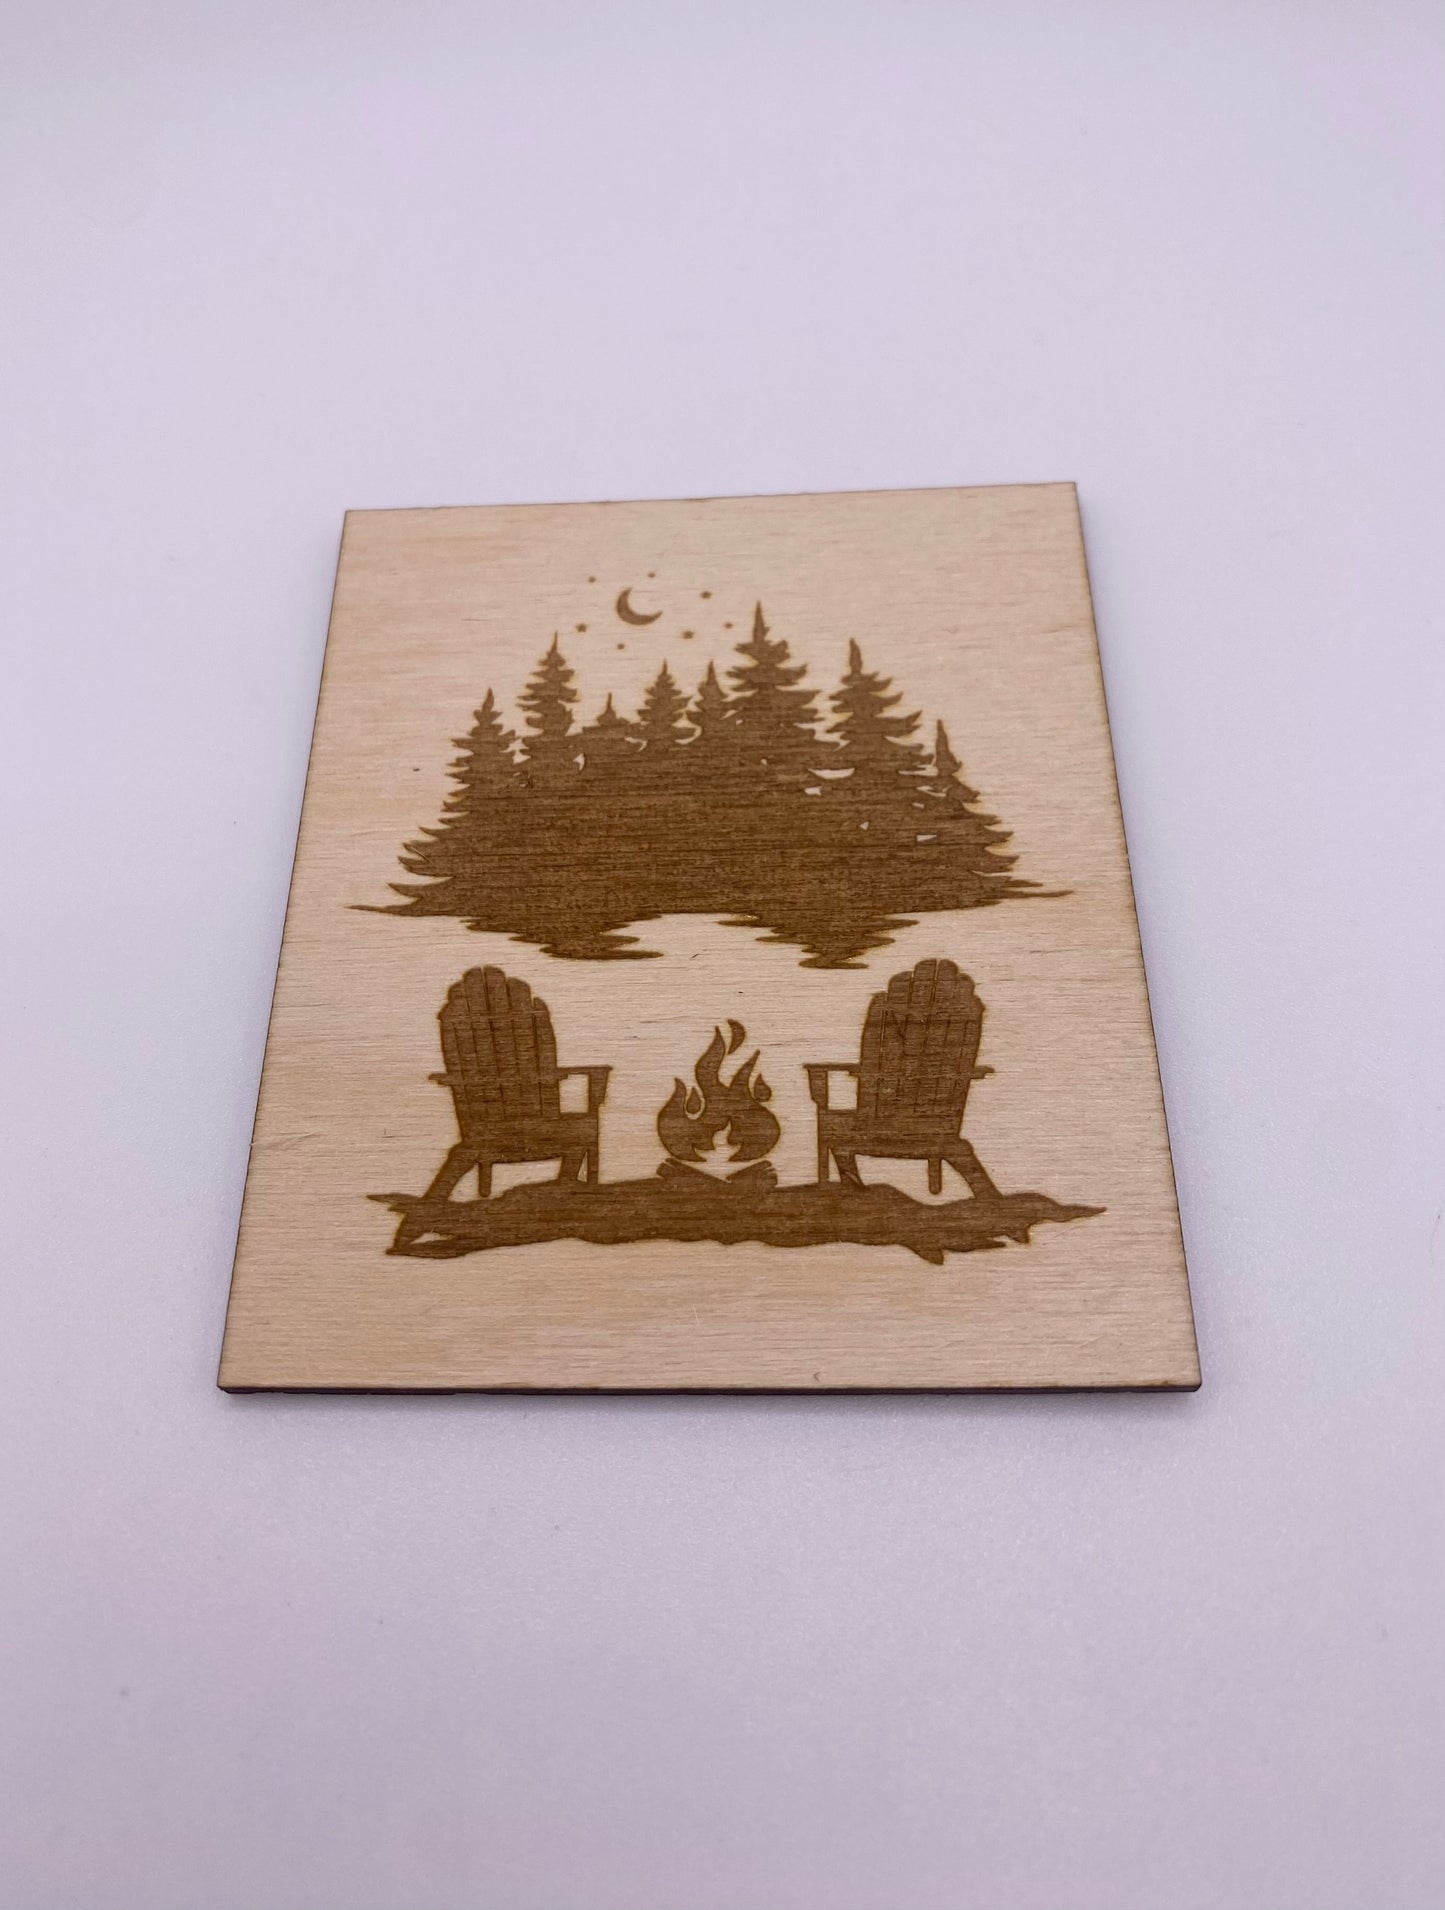 Adirondack chairs - forest view - Creative Designs By Kari